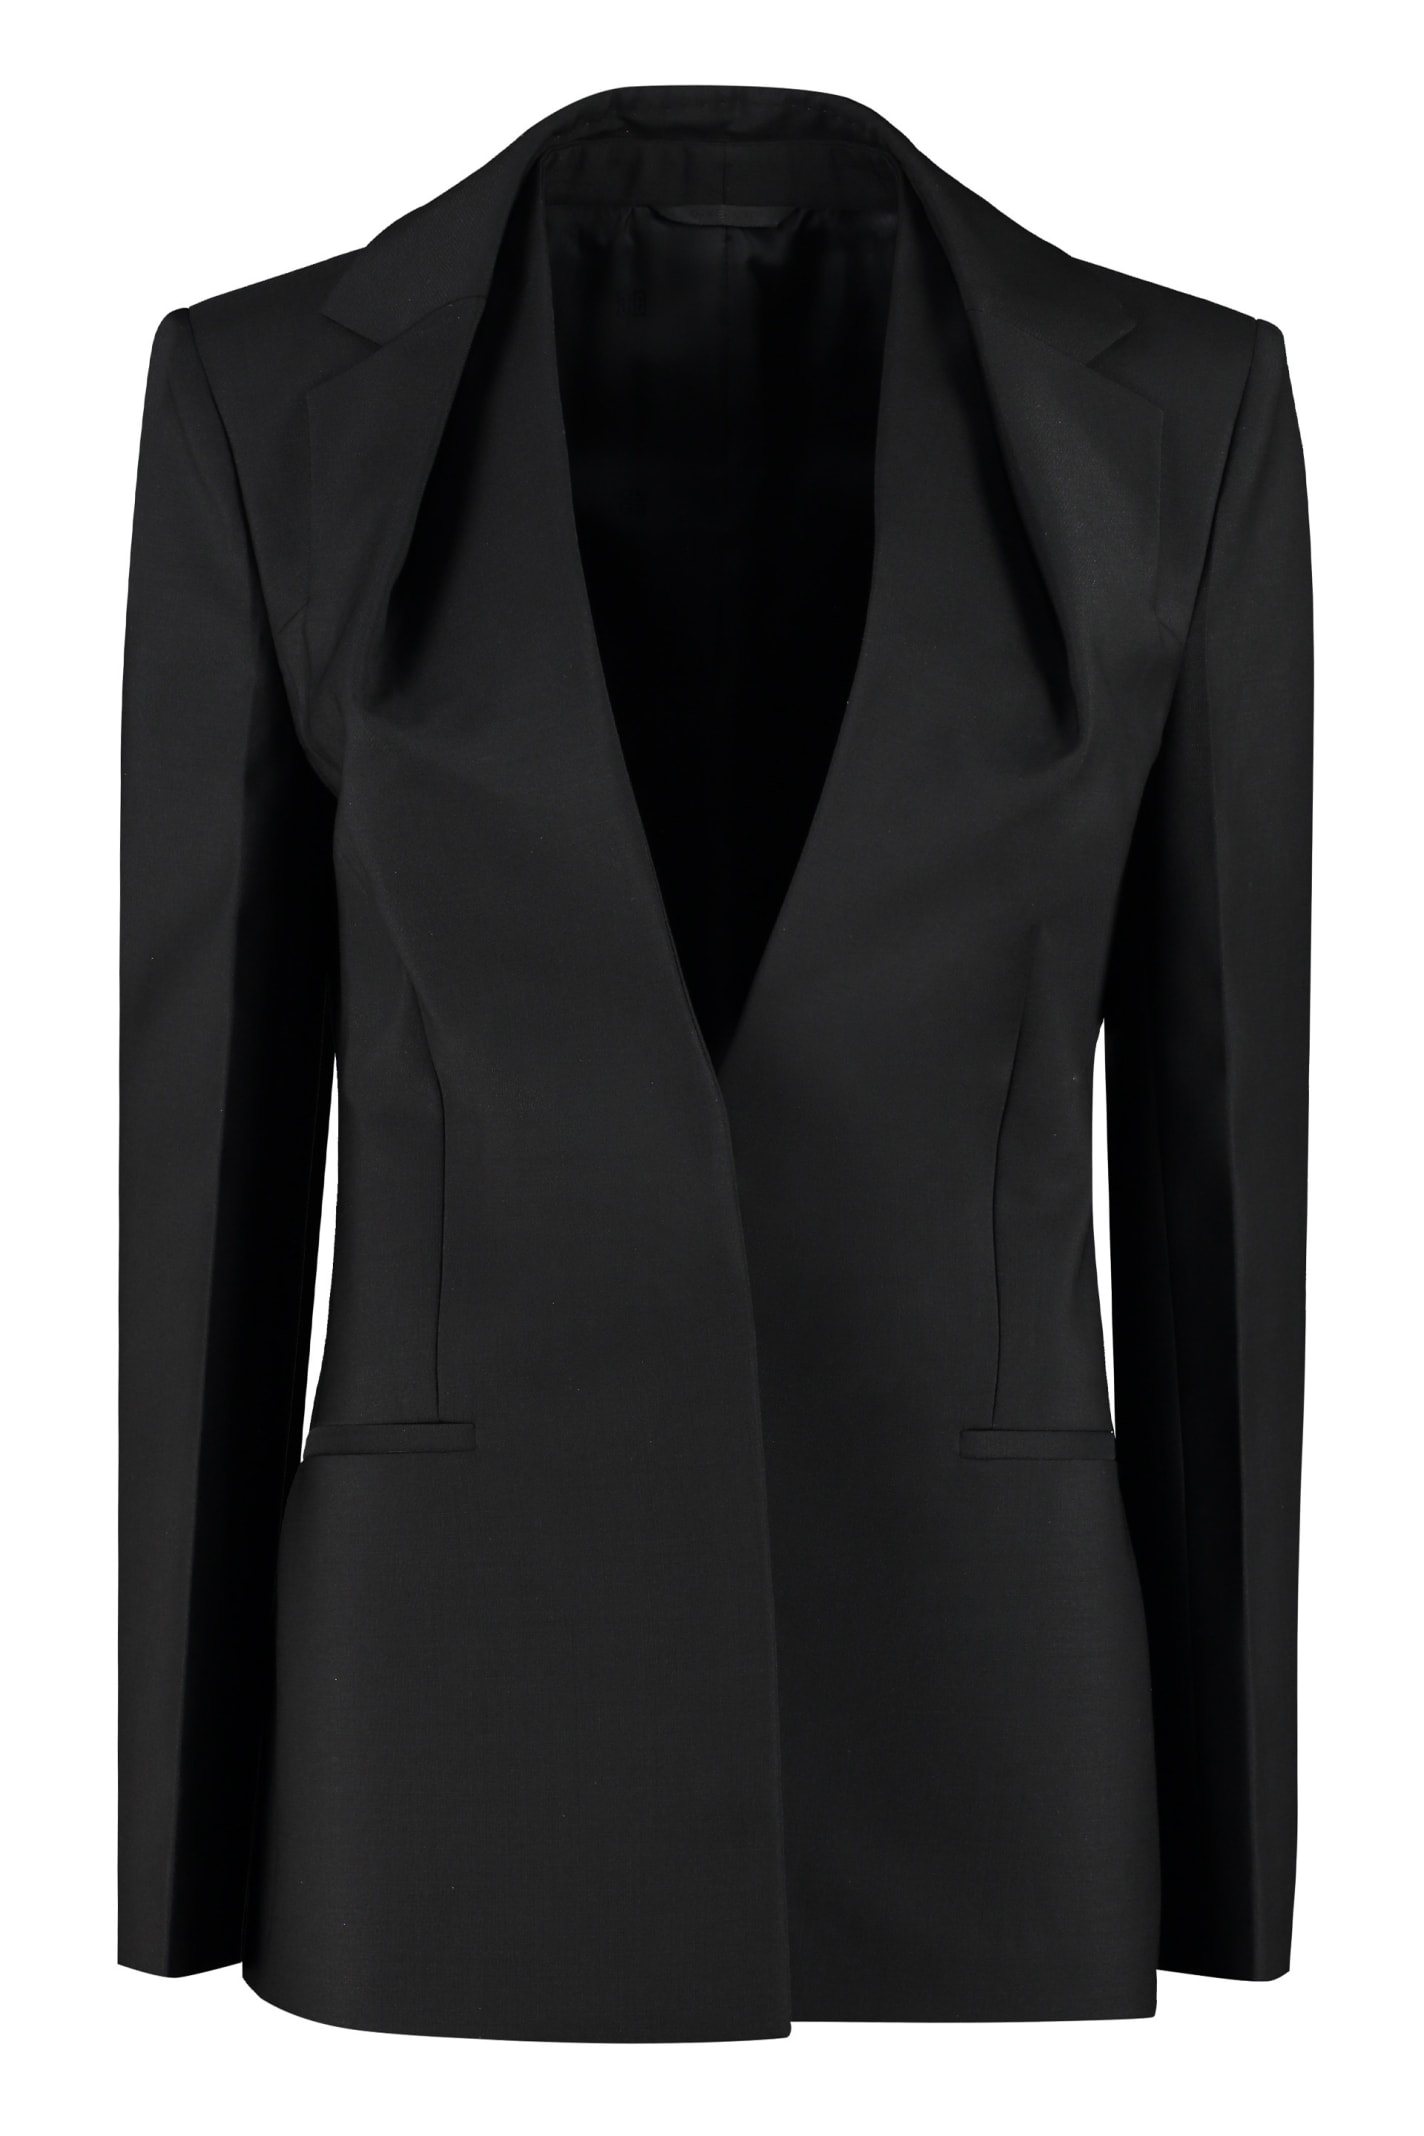 Givenchy Wool Blend Single-breasted Blazer